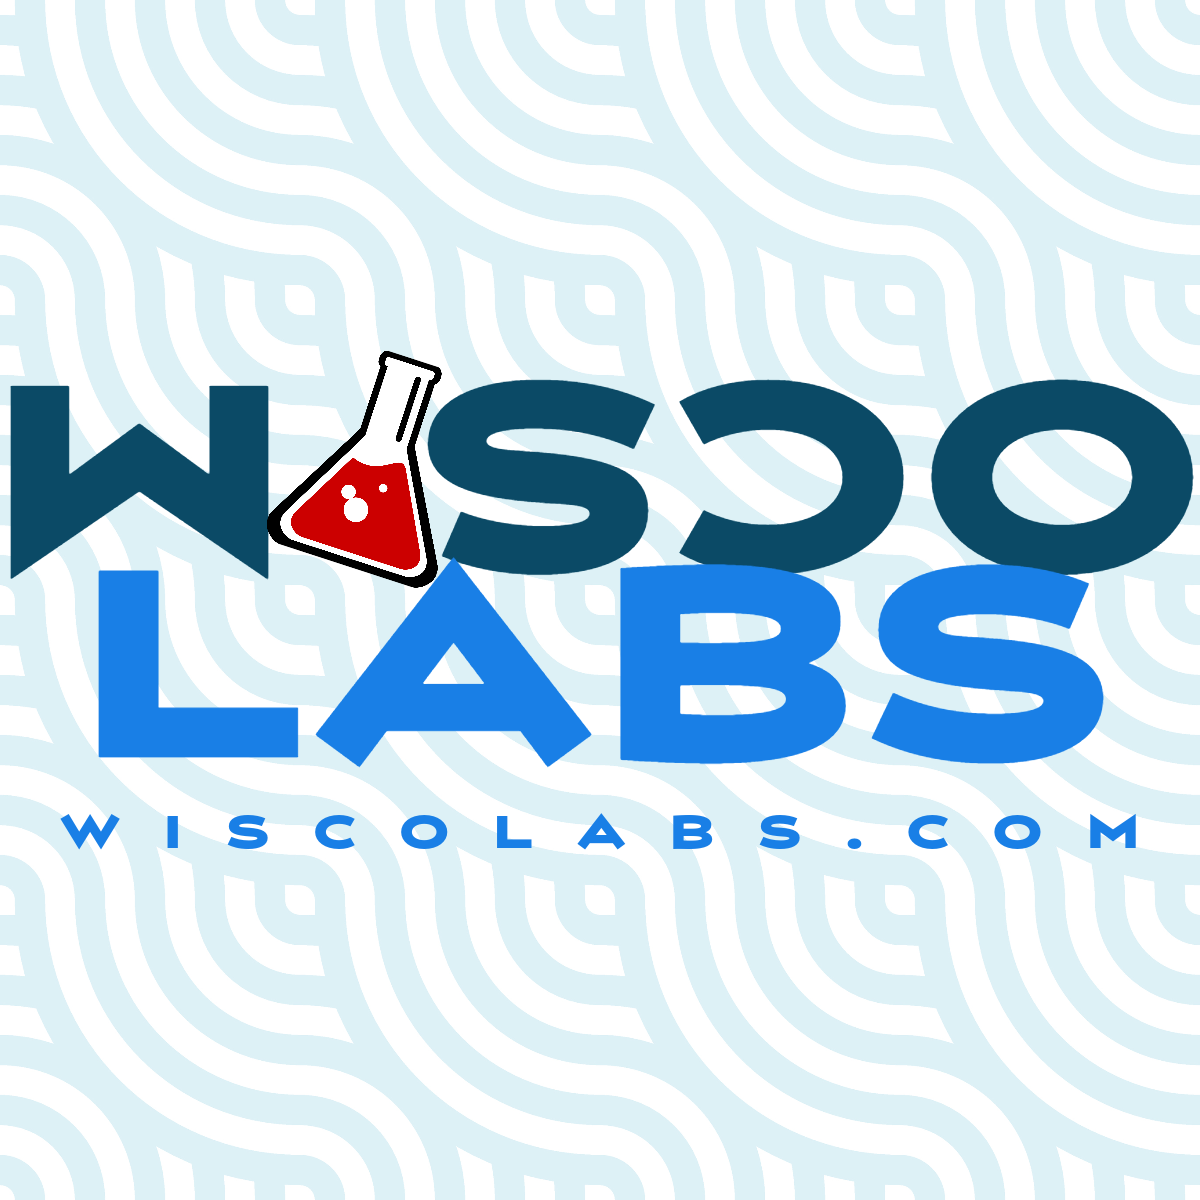 wiscolabs